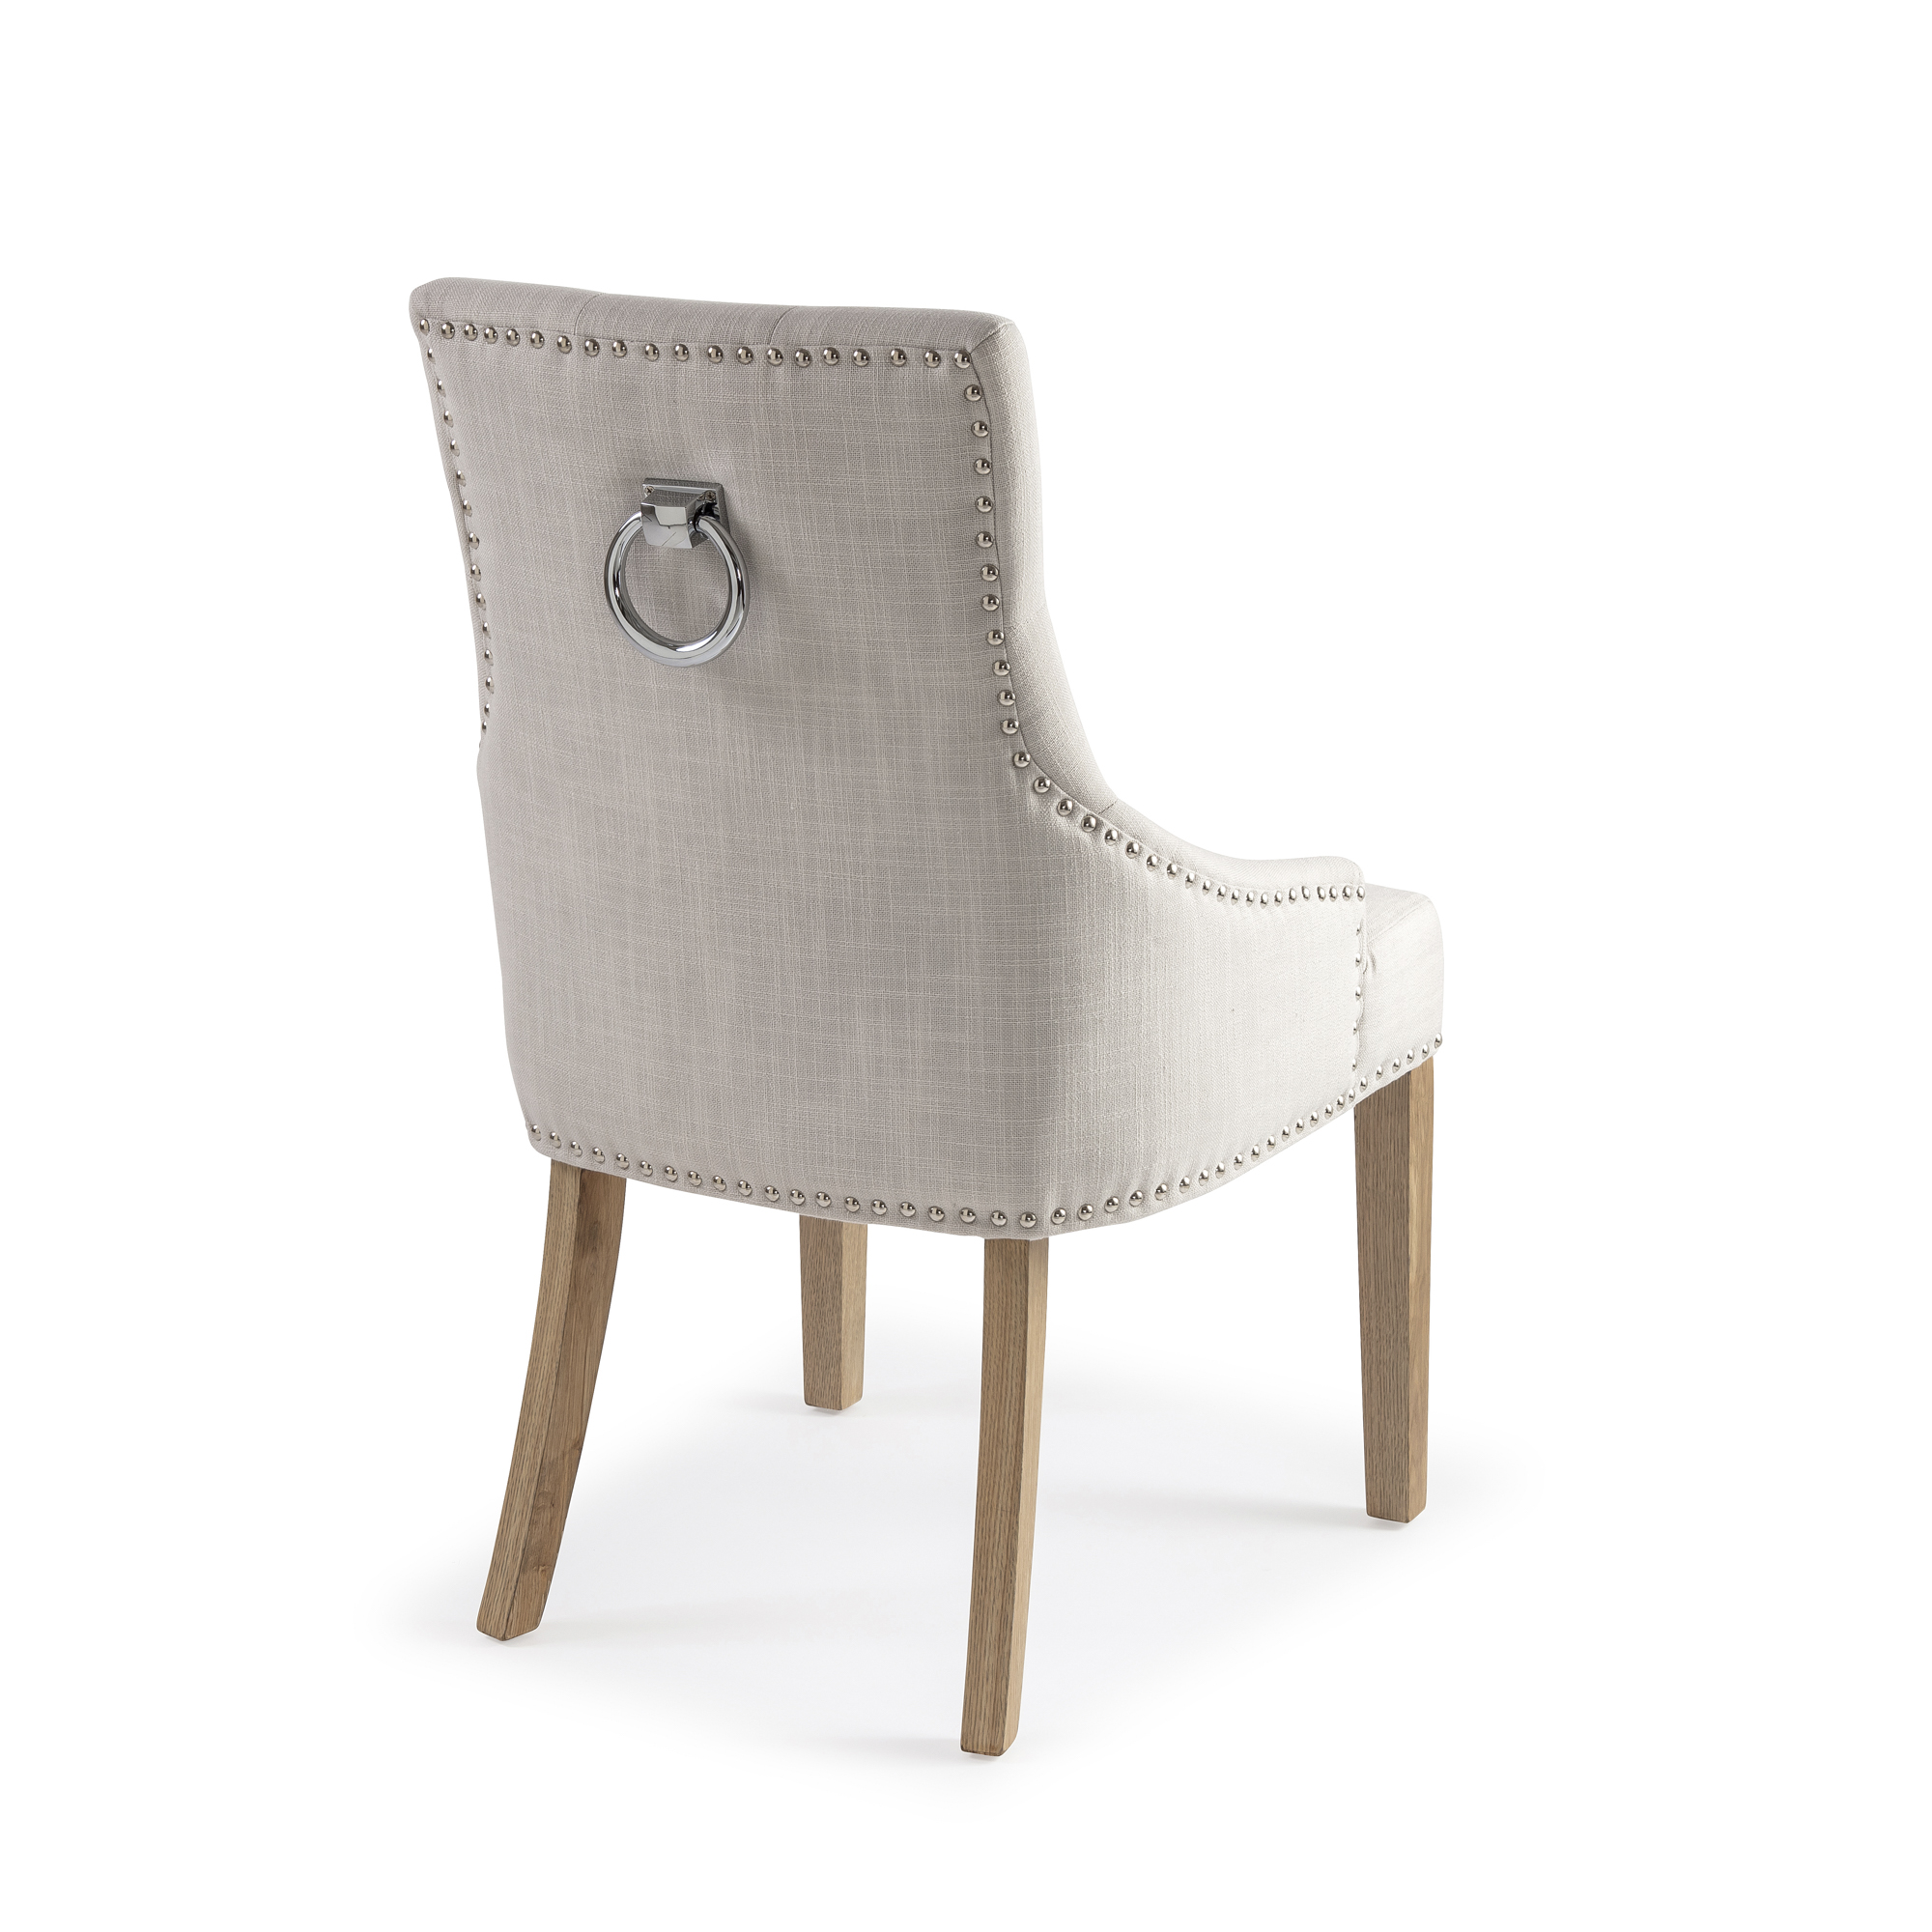 Chelsea Upholstered Scoop Dining Chair In A Natural Linen Fabric with